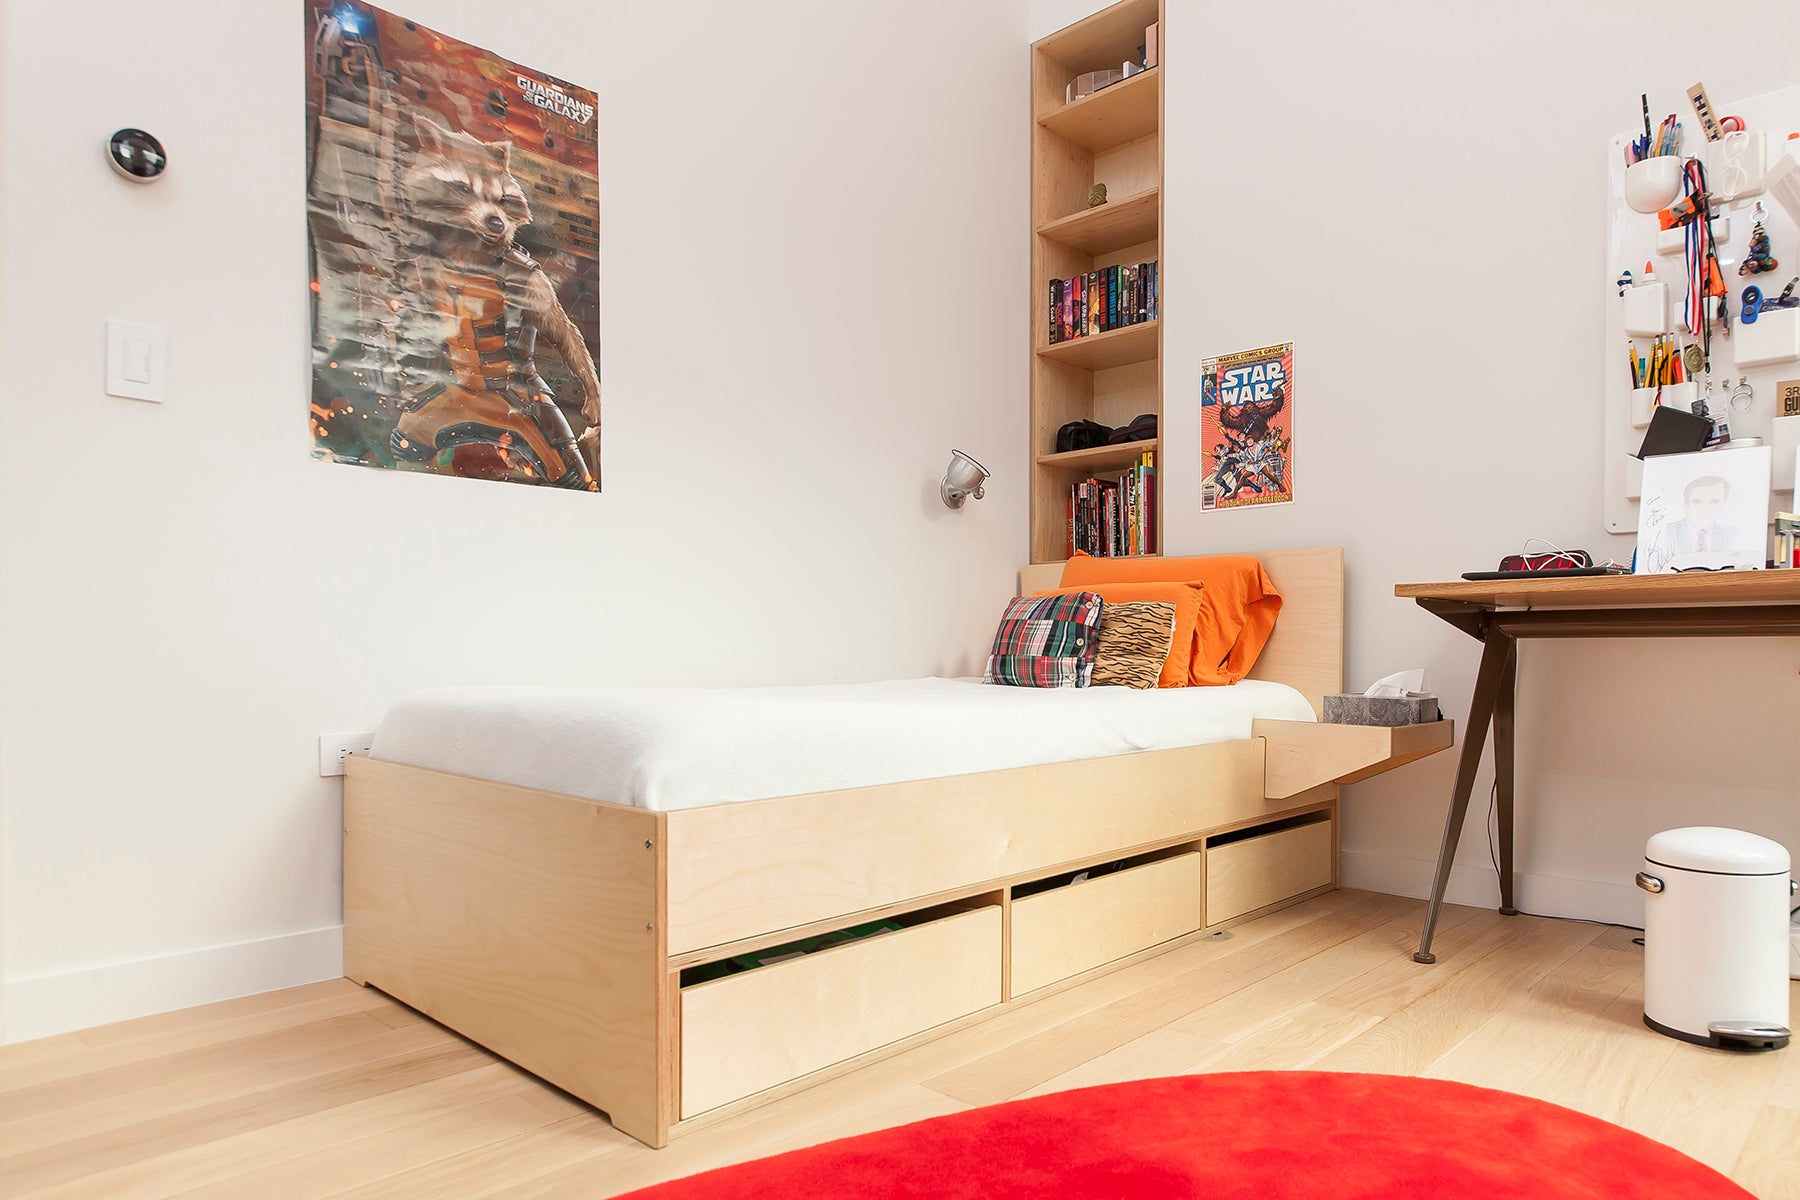 Minimalist child's bedroom with single bed, desk, artwork on wall, and red circular rug.